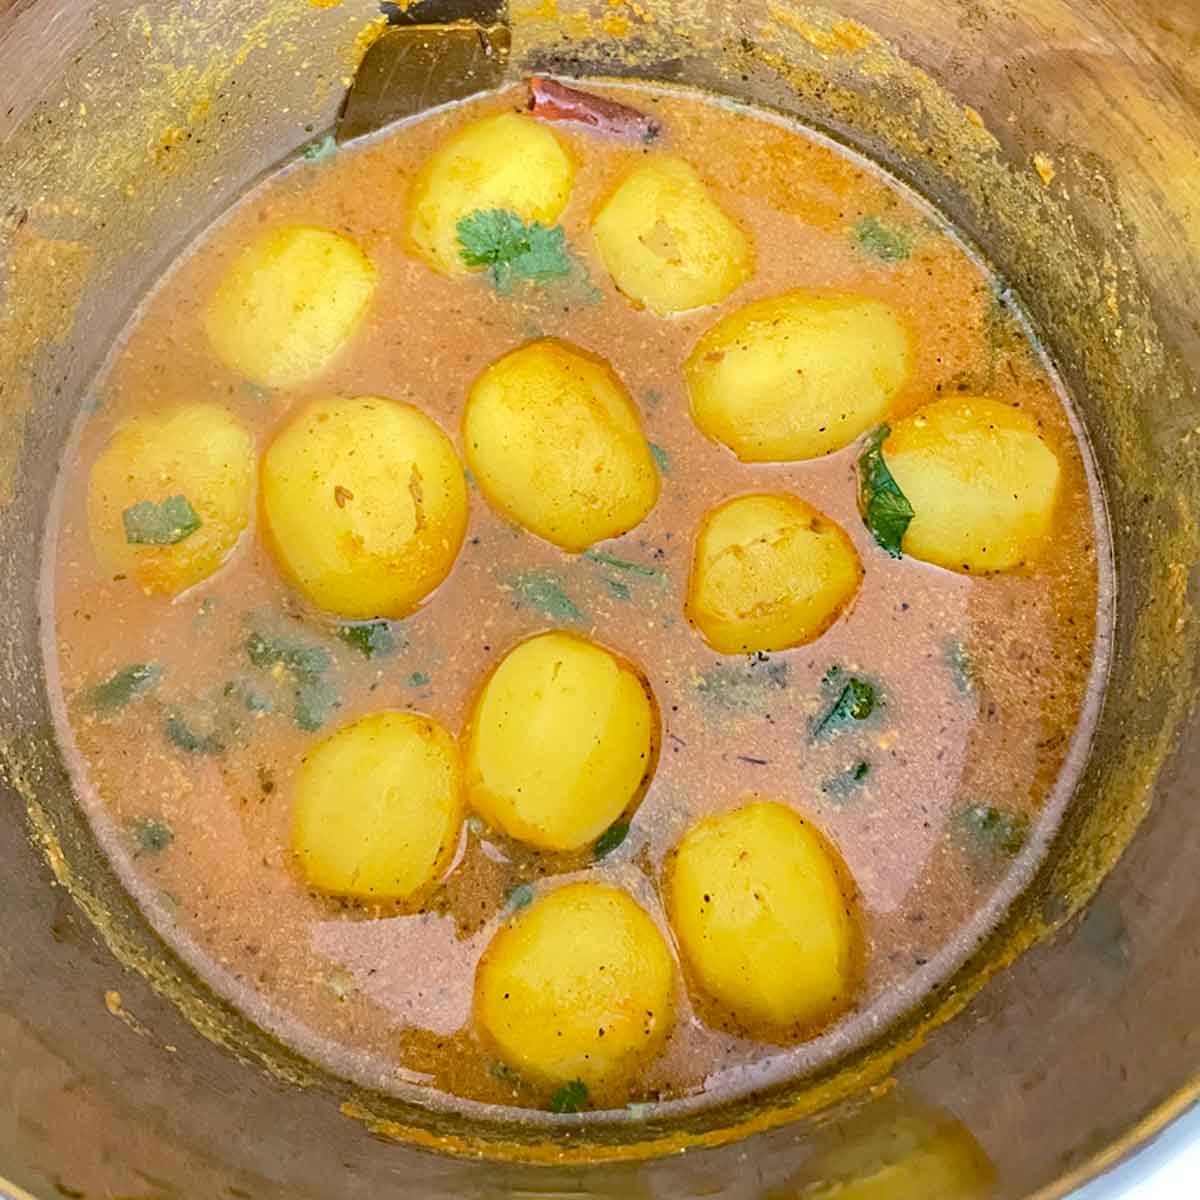 Dum aloo garnished with cilantro in instant pot.